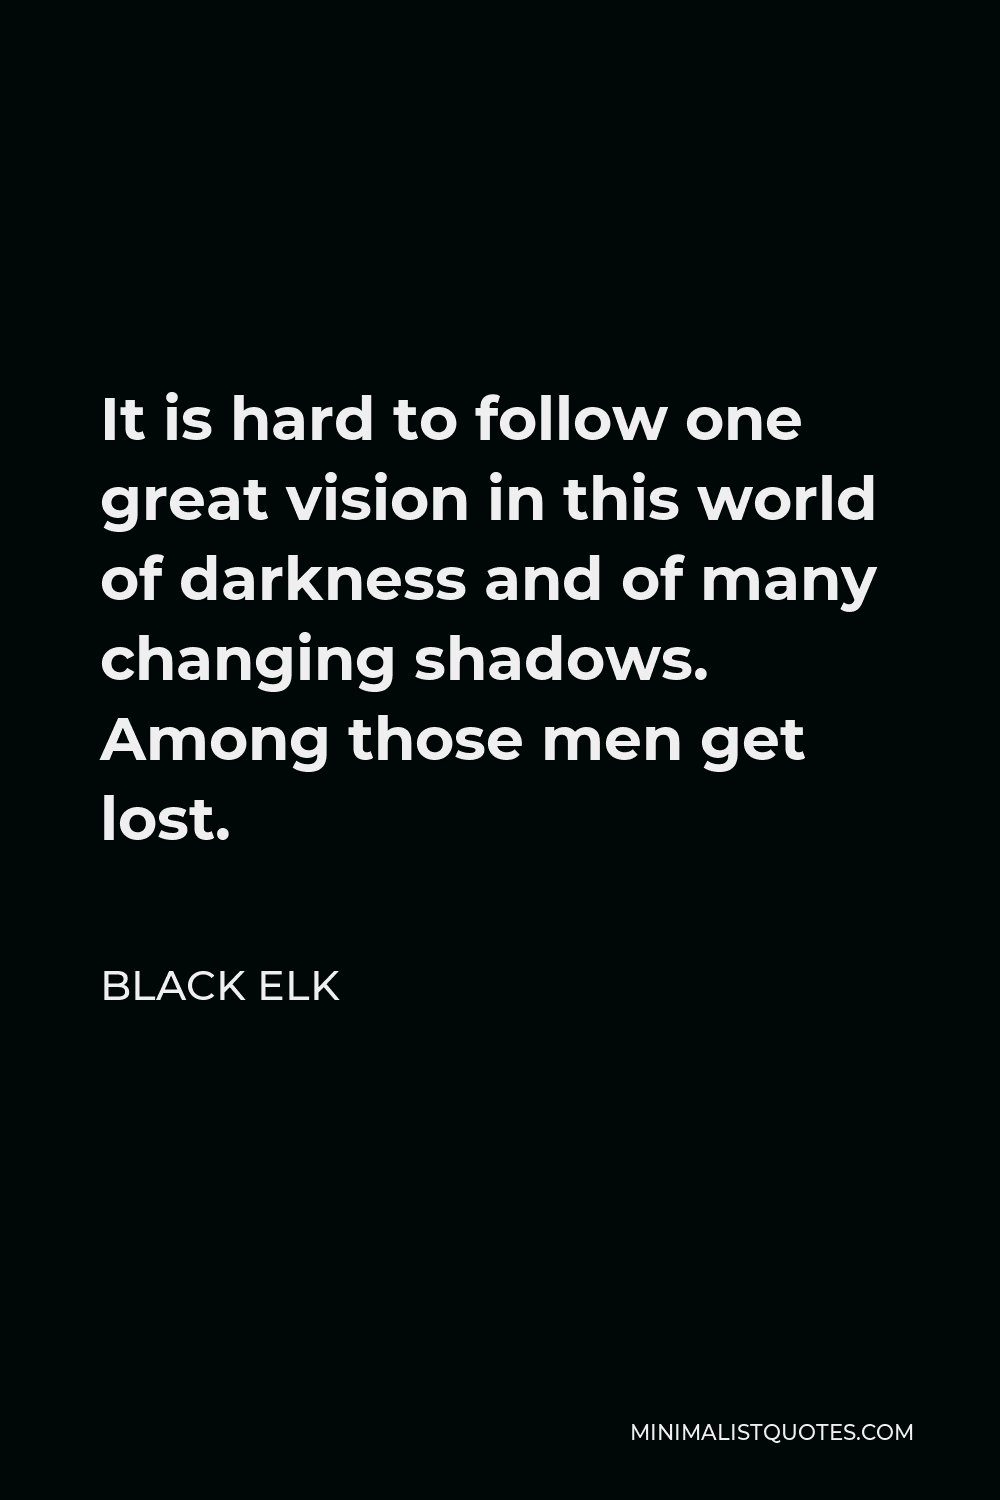 Black Elk Quote - It is hard to follow one great vision in this world of darkness and of many changing shadows. Among those men get lost.